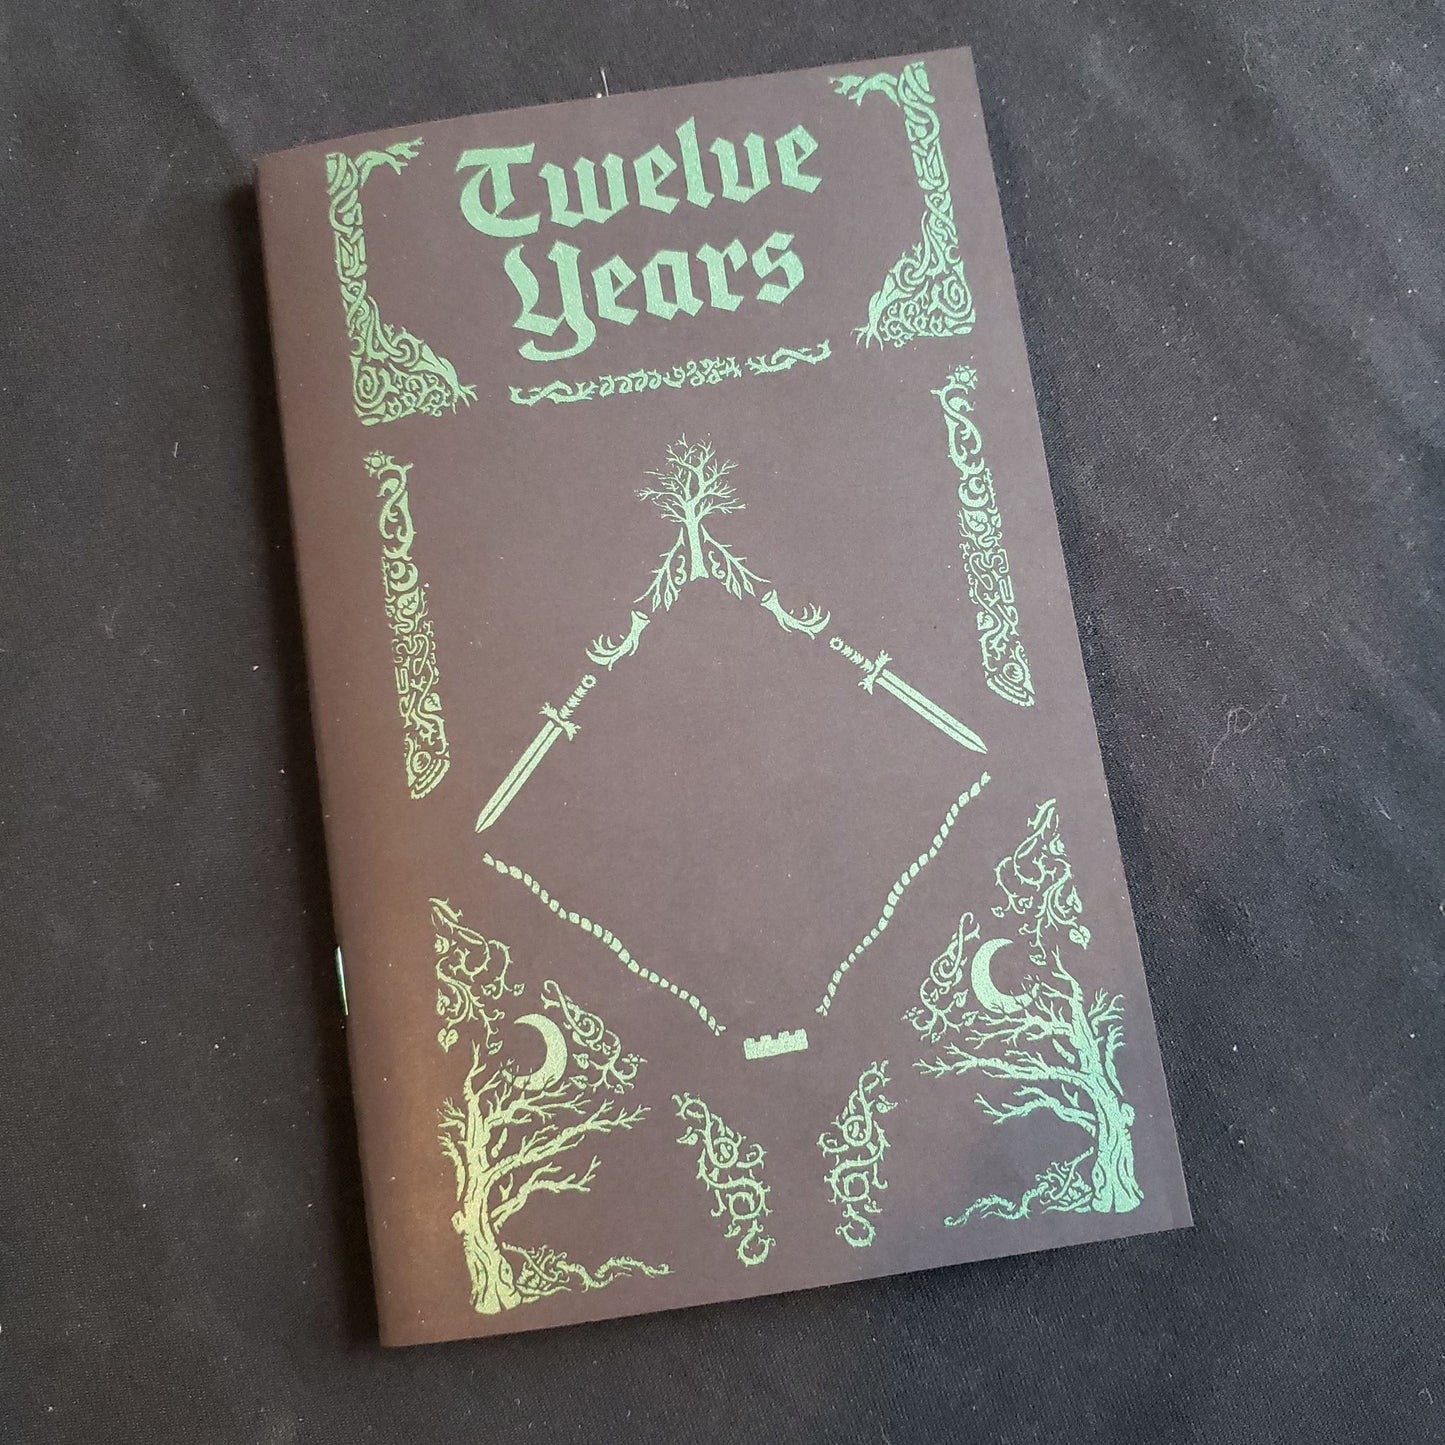 Image shows the front cover of the Twelve Years roleplaying game book